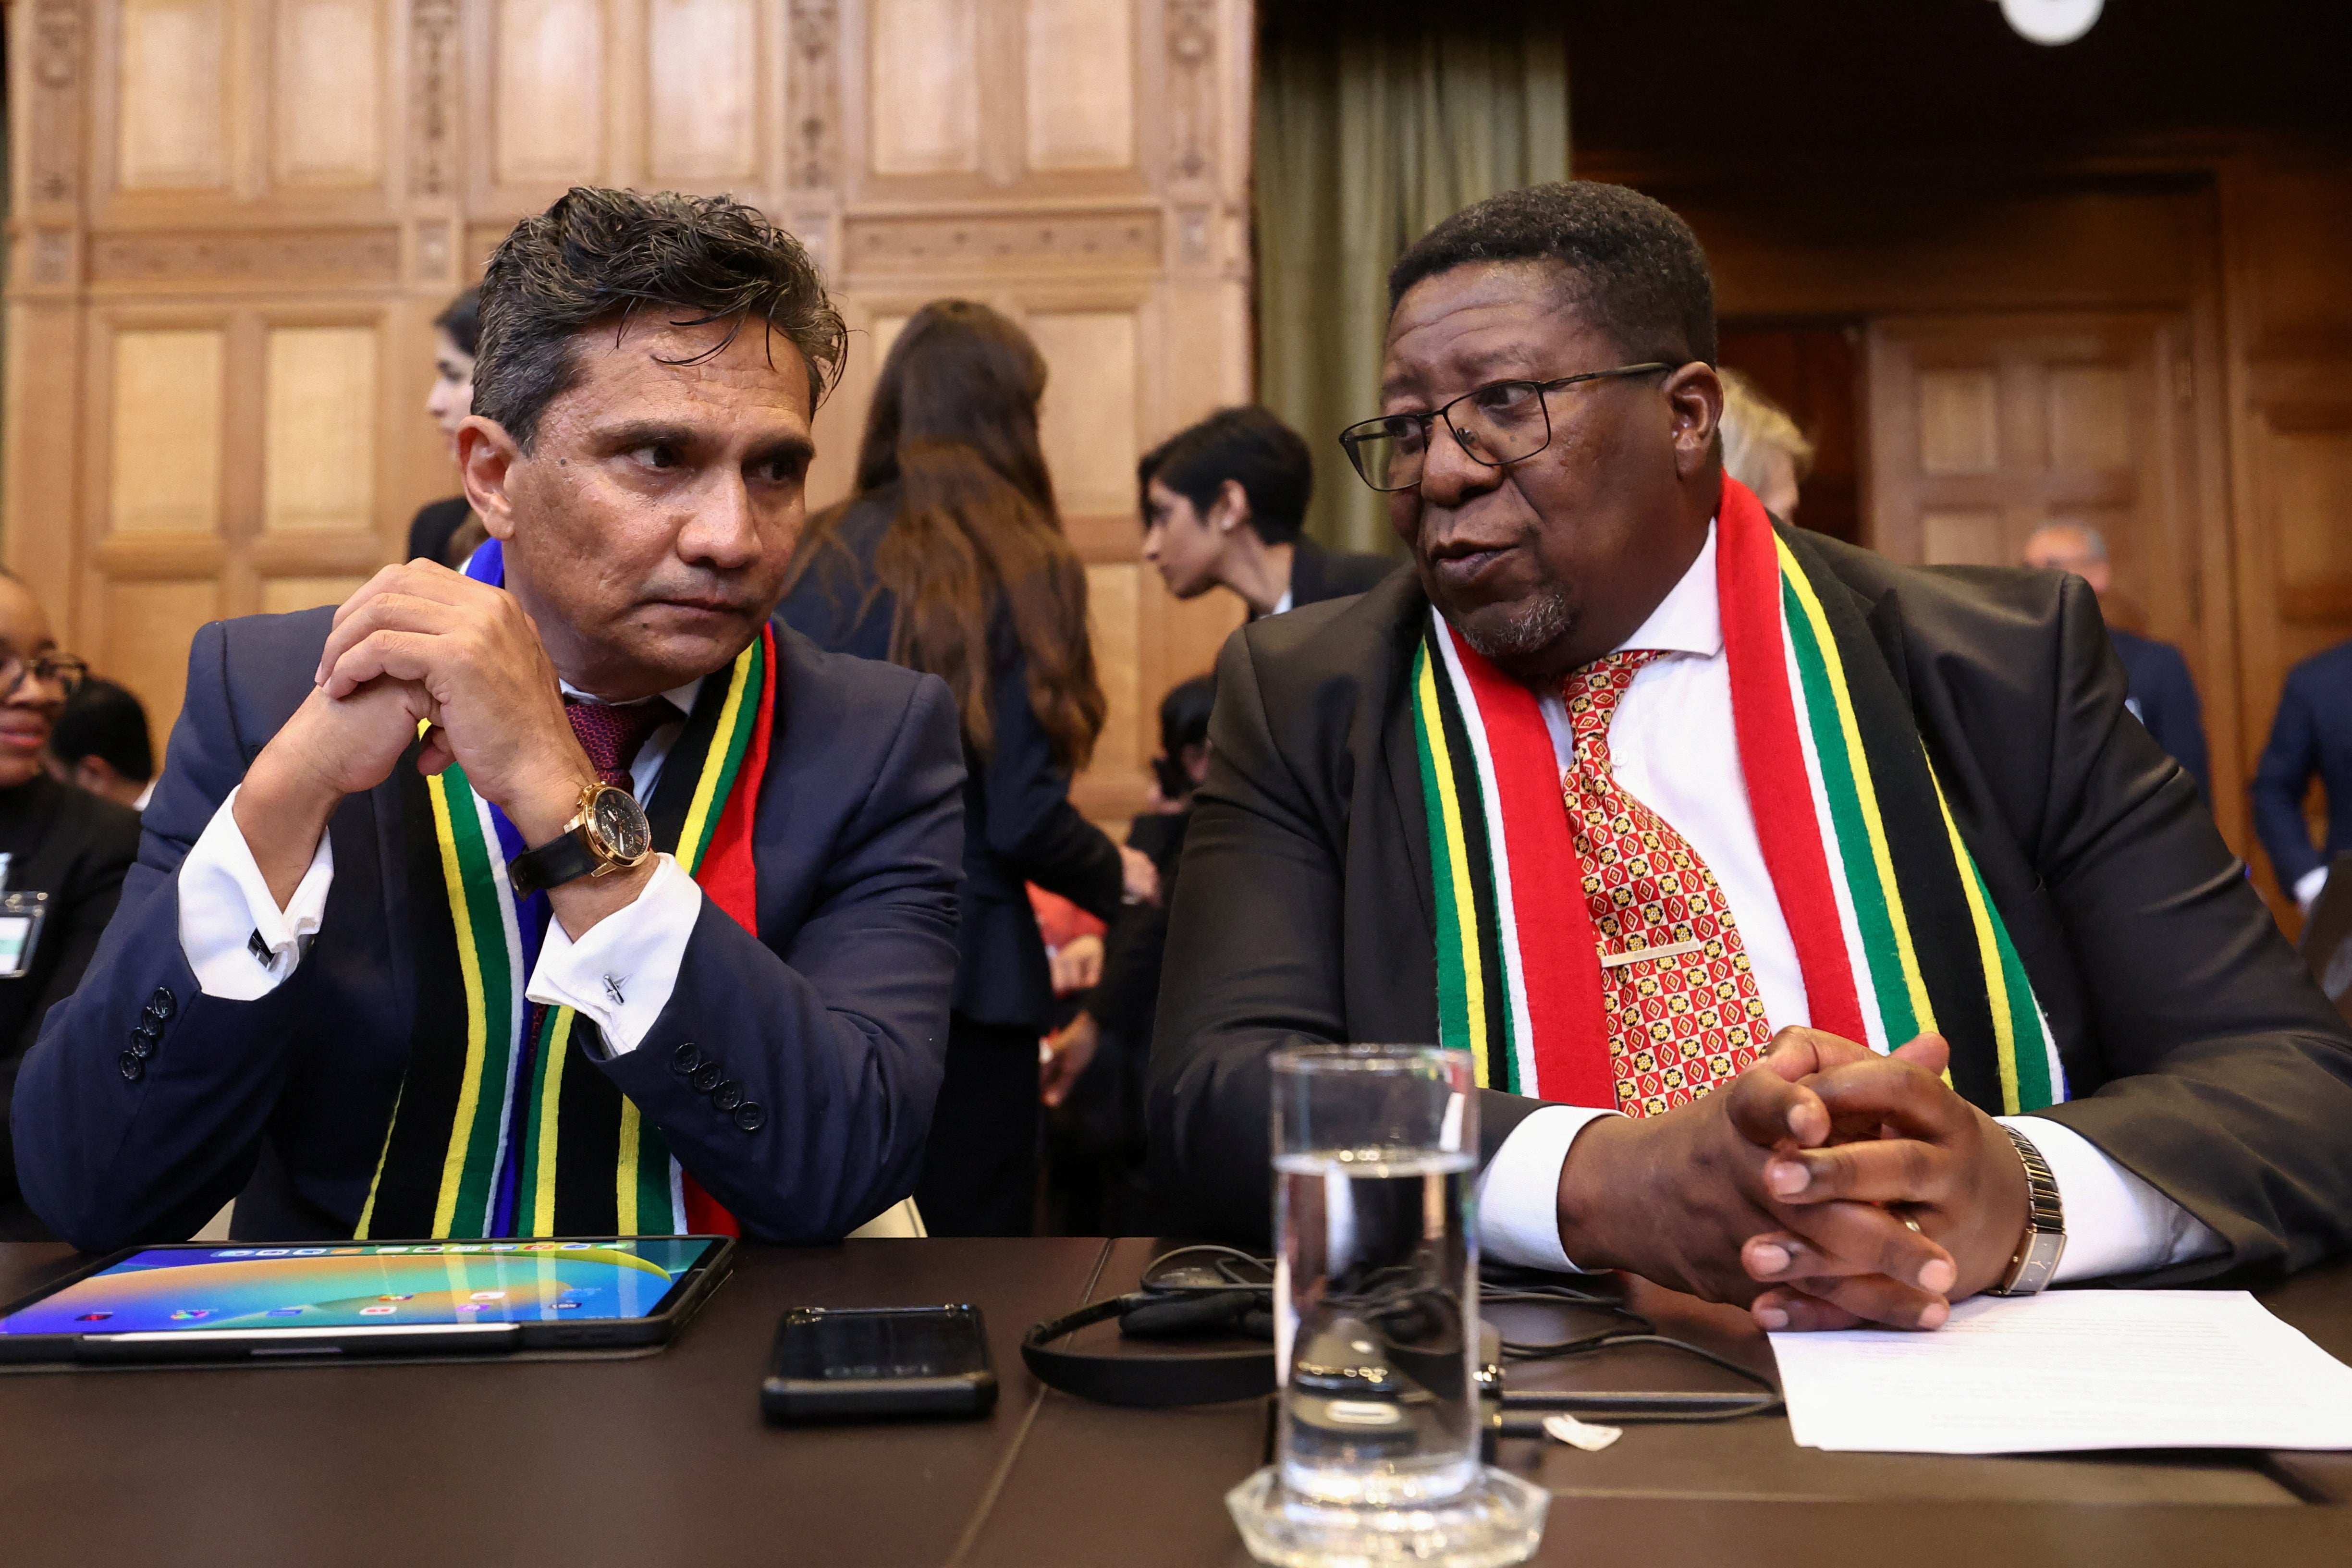 Director-General of the Department of International Relations and Cooperation of the Republic of South Africa Zane Dangor and South African Ambassador to the Netherlands Vusimuzi Madonsela look on at the International Court of Justice (ICJ)